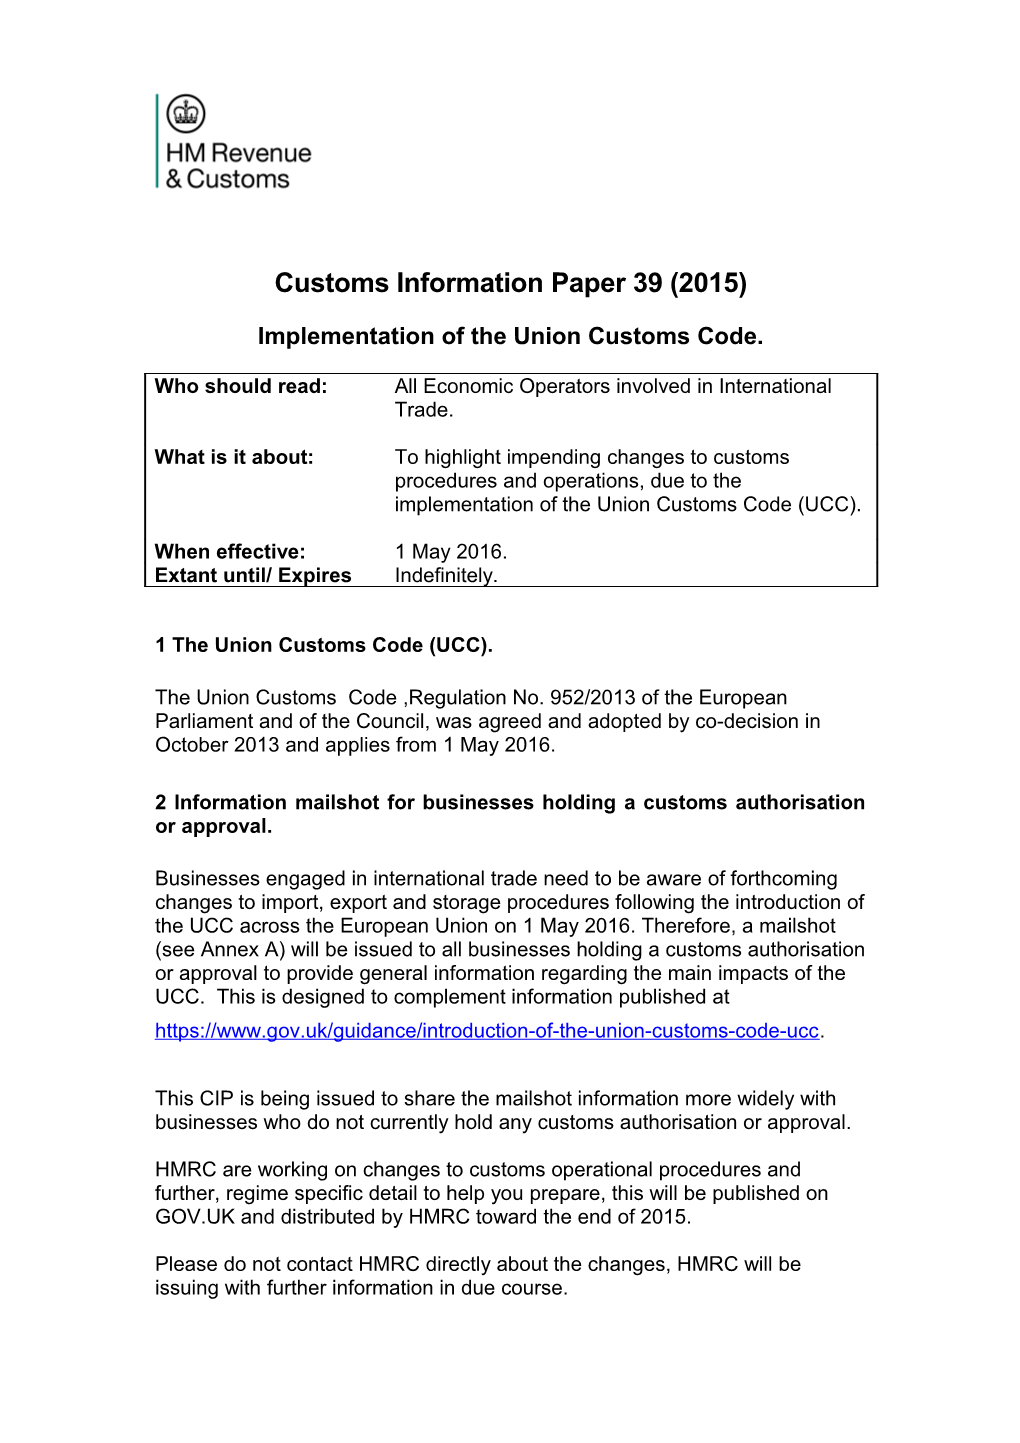 Implementation of the Union Customs Code